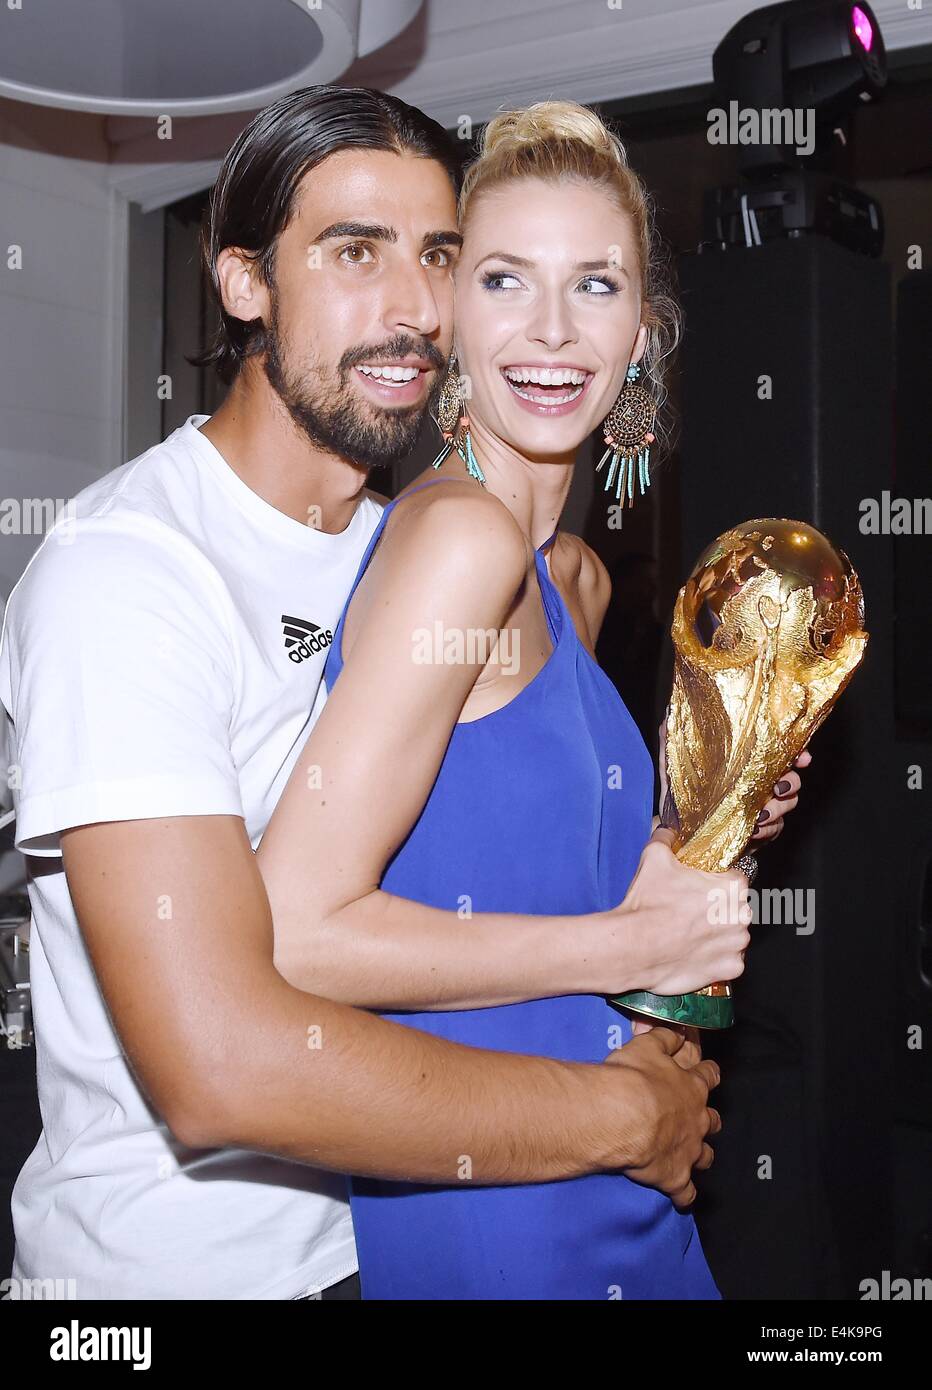 Handout: Rio de Janeiro, Brazil. 14th July, 2014. Sami Khedira and girlfriend Lena Gercke celebrating Germany's victory in the Soccer World Cup with the trophy at Hotel Sheraton in Rio De Janeiro, Brazil on 13 July 2014. Germany won 1-0 against Argentina in the FIFA World Cup 2014 Final match. (: Image for in connection with the current reporting on the World Cup and together with the source: Photo: Markus Gilliar/DFB/dpa.) Credit:  dpa picture alliance/Alamy Live News Stock Photo